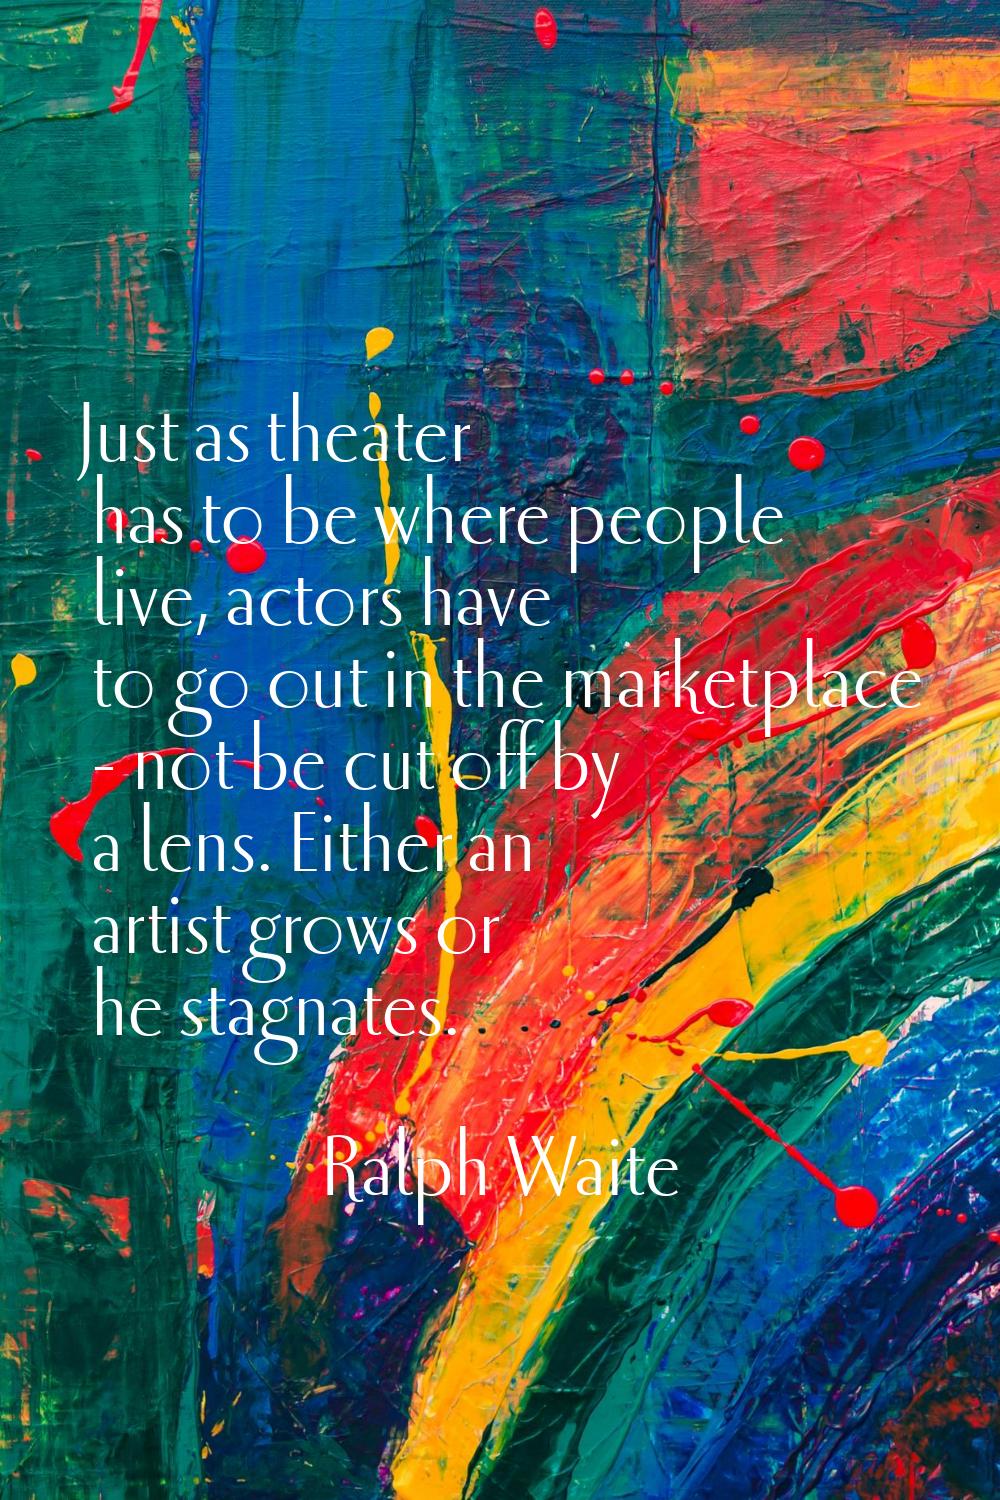 Just as theater has to be where people live, actors have to go out in the marketplace - not be cut 